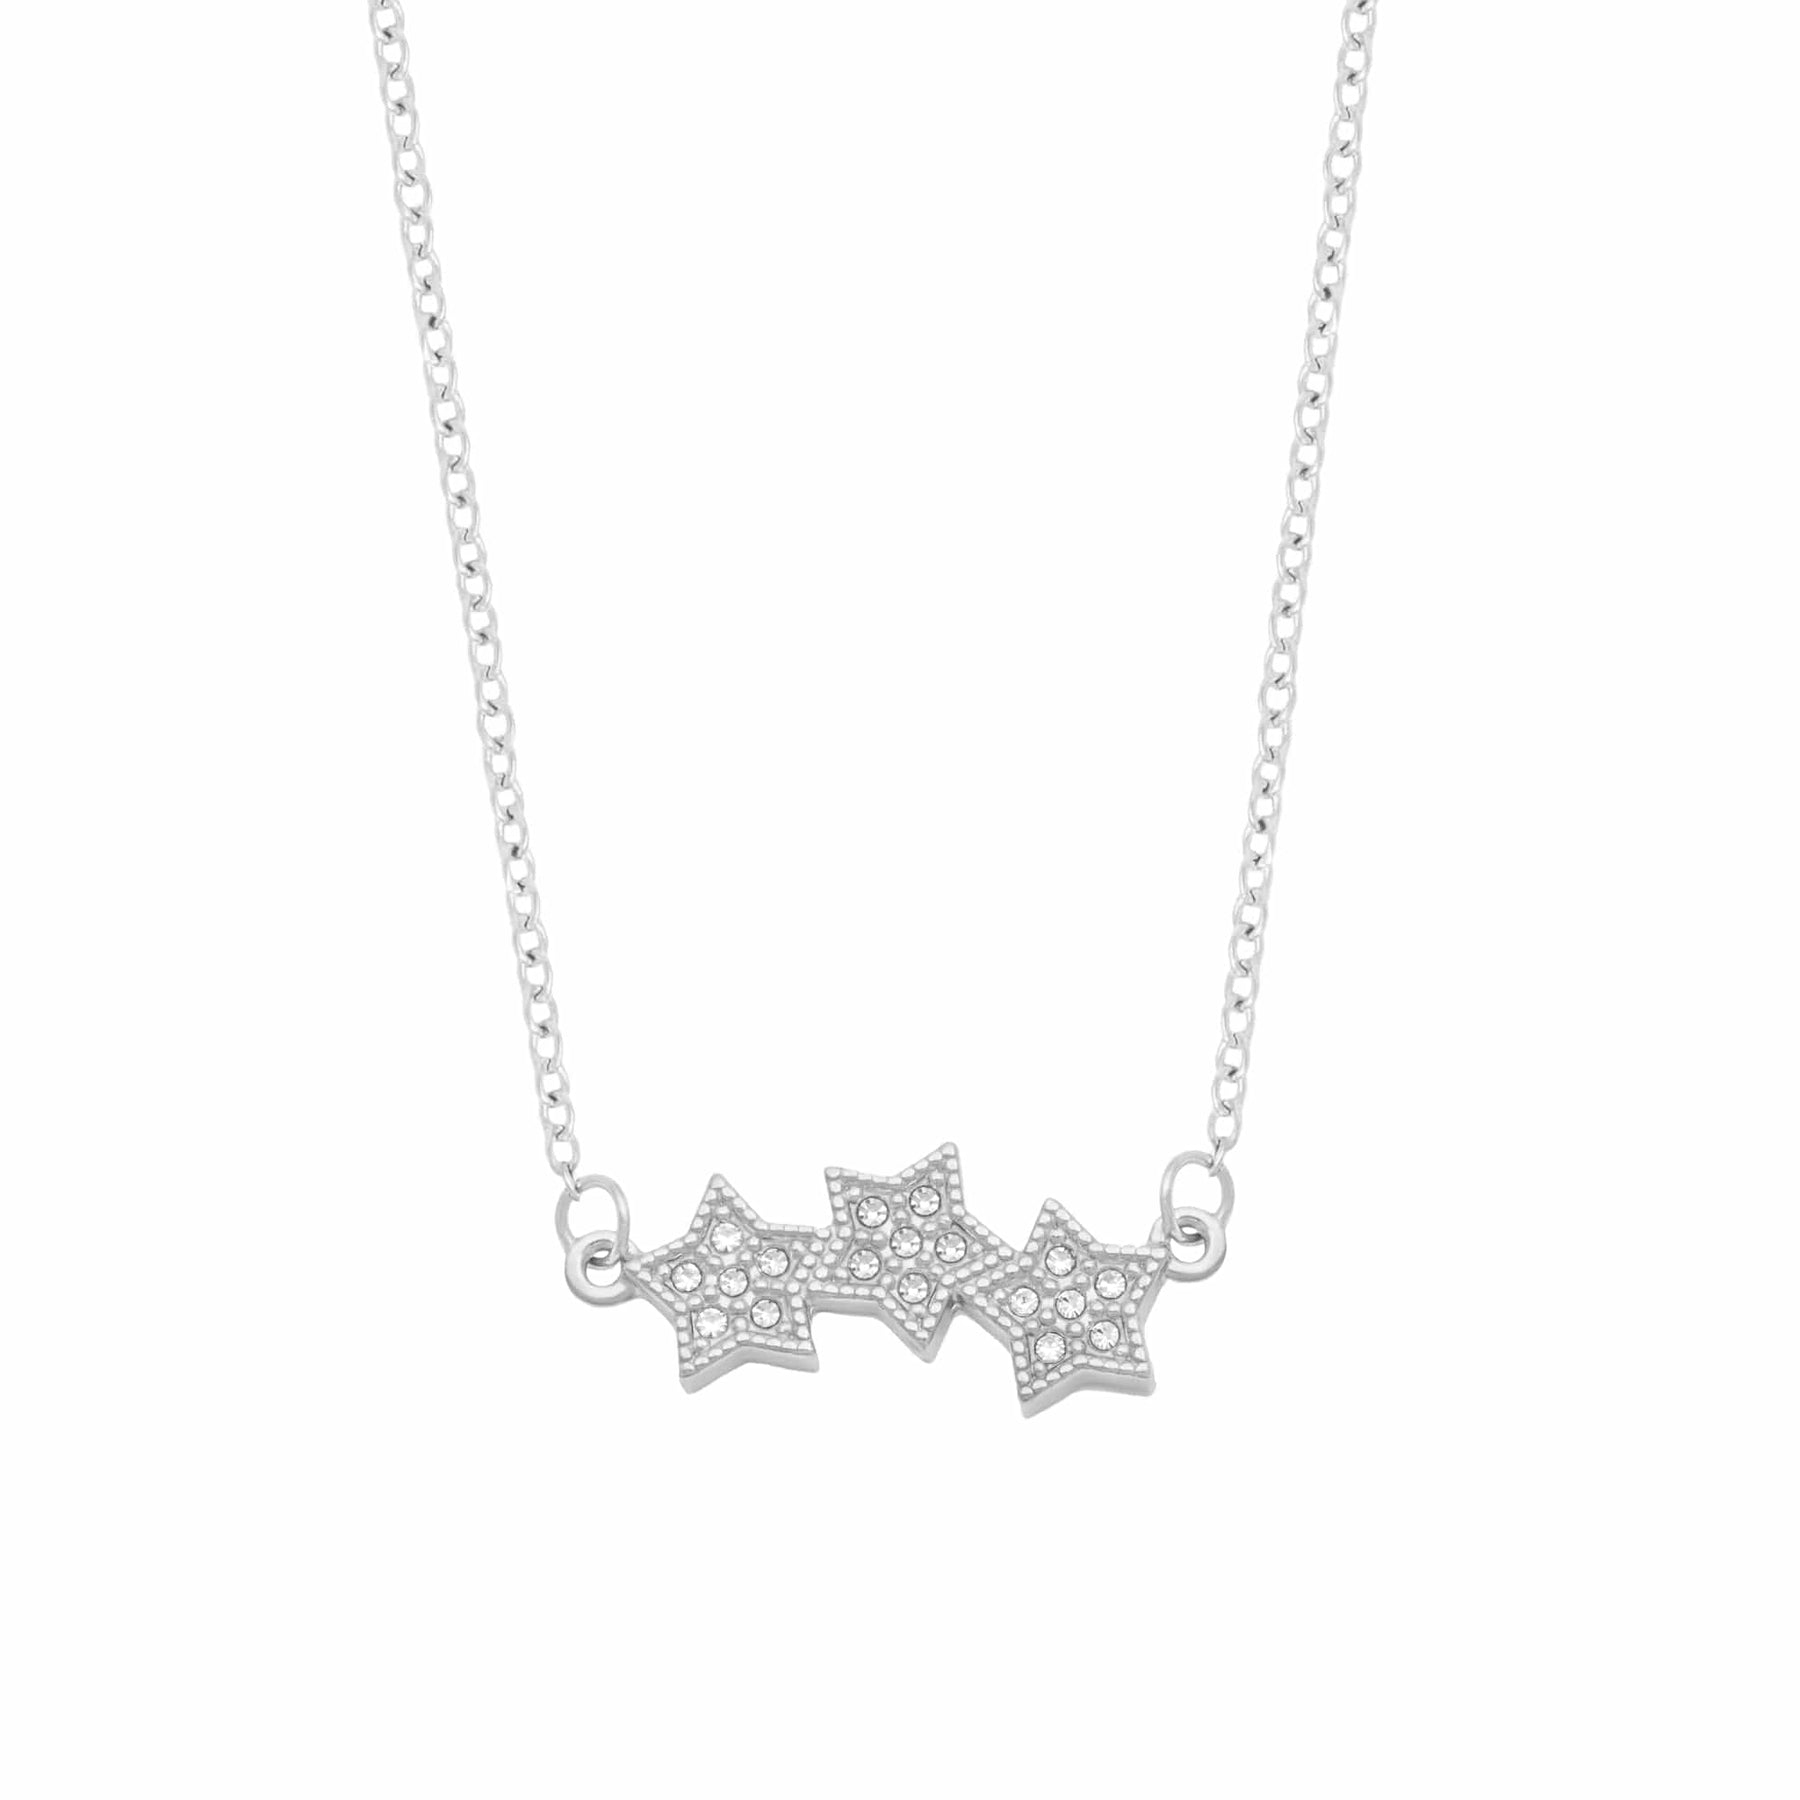 BohoMoon Stainless Steel Space Necklace Silver